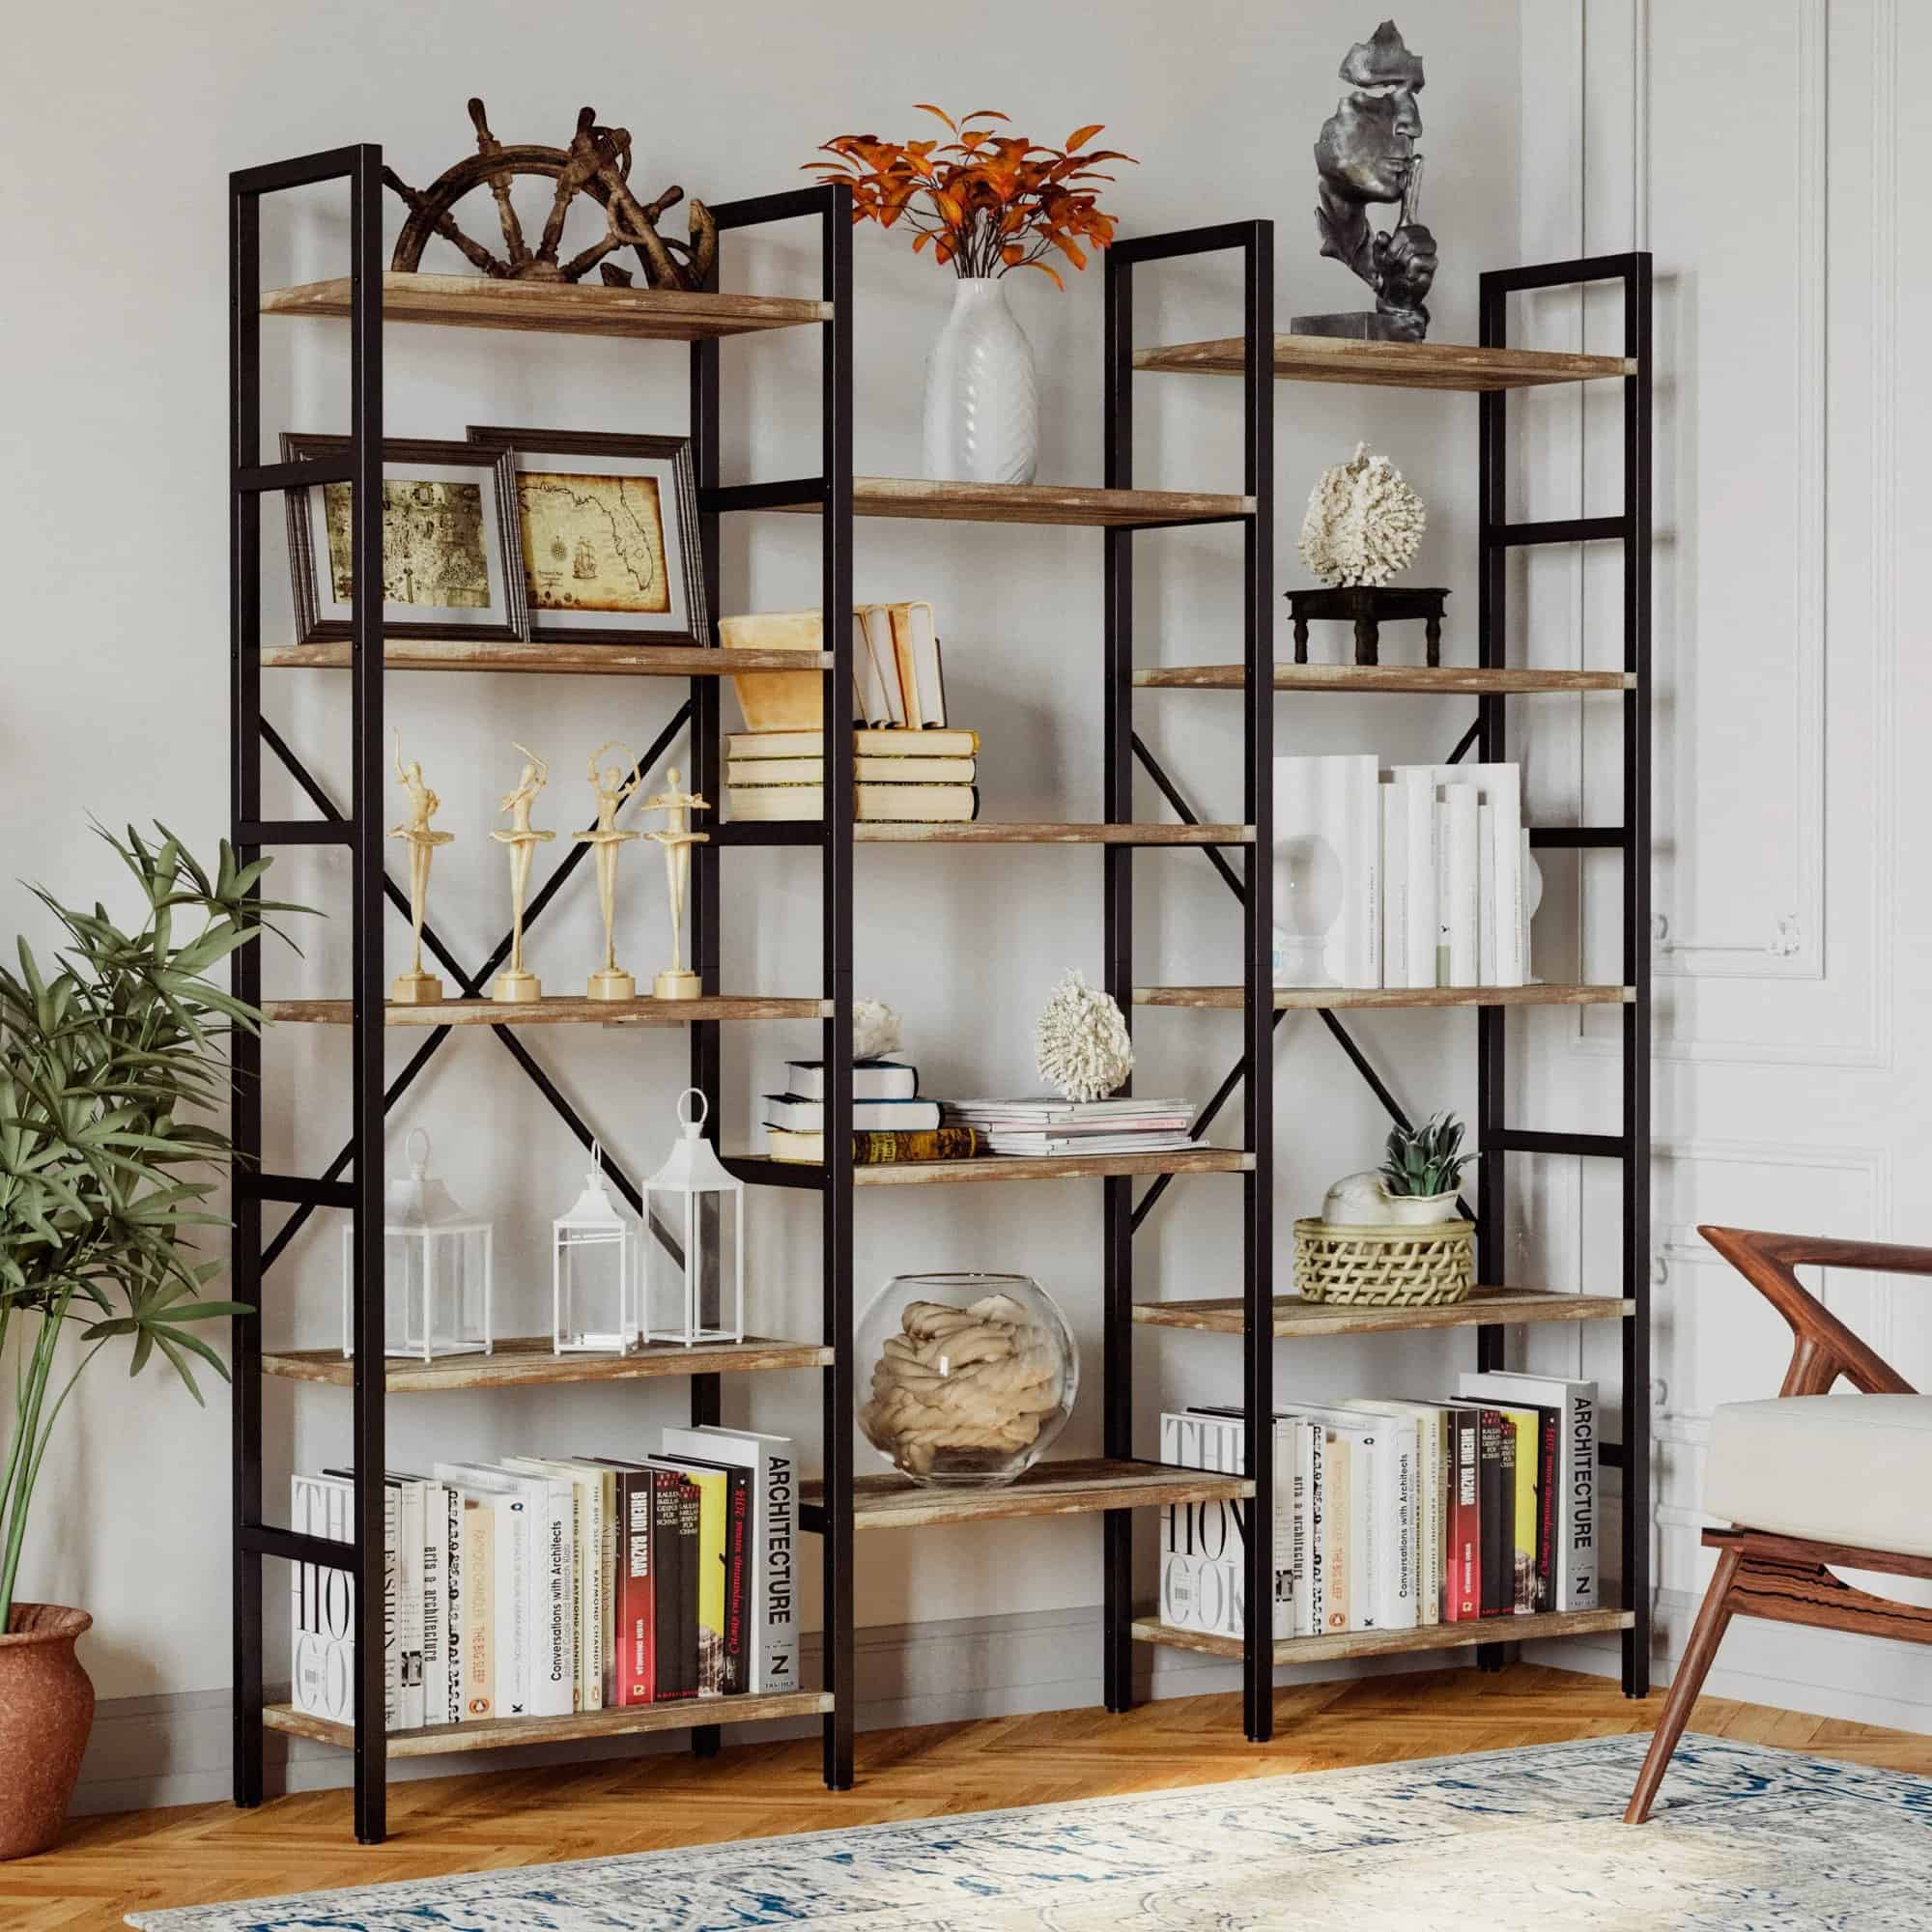 Go For A Big Bookshelf To Fill Up Space